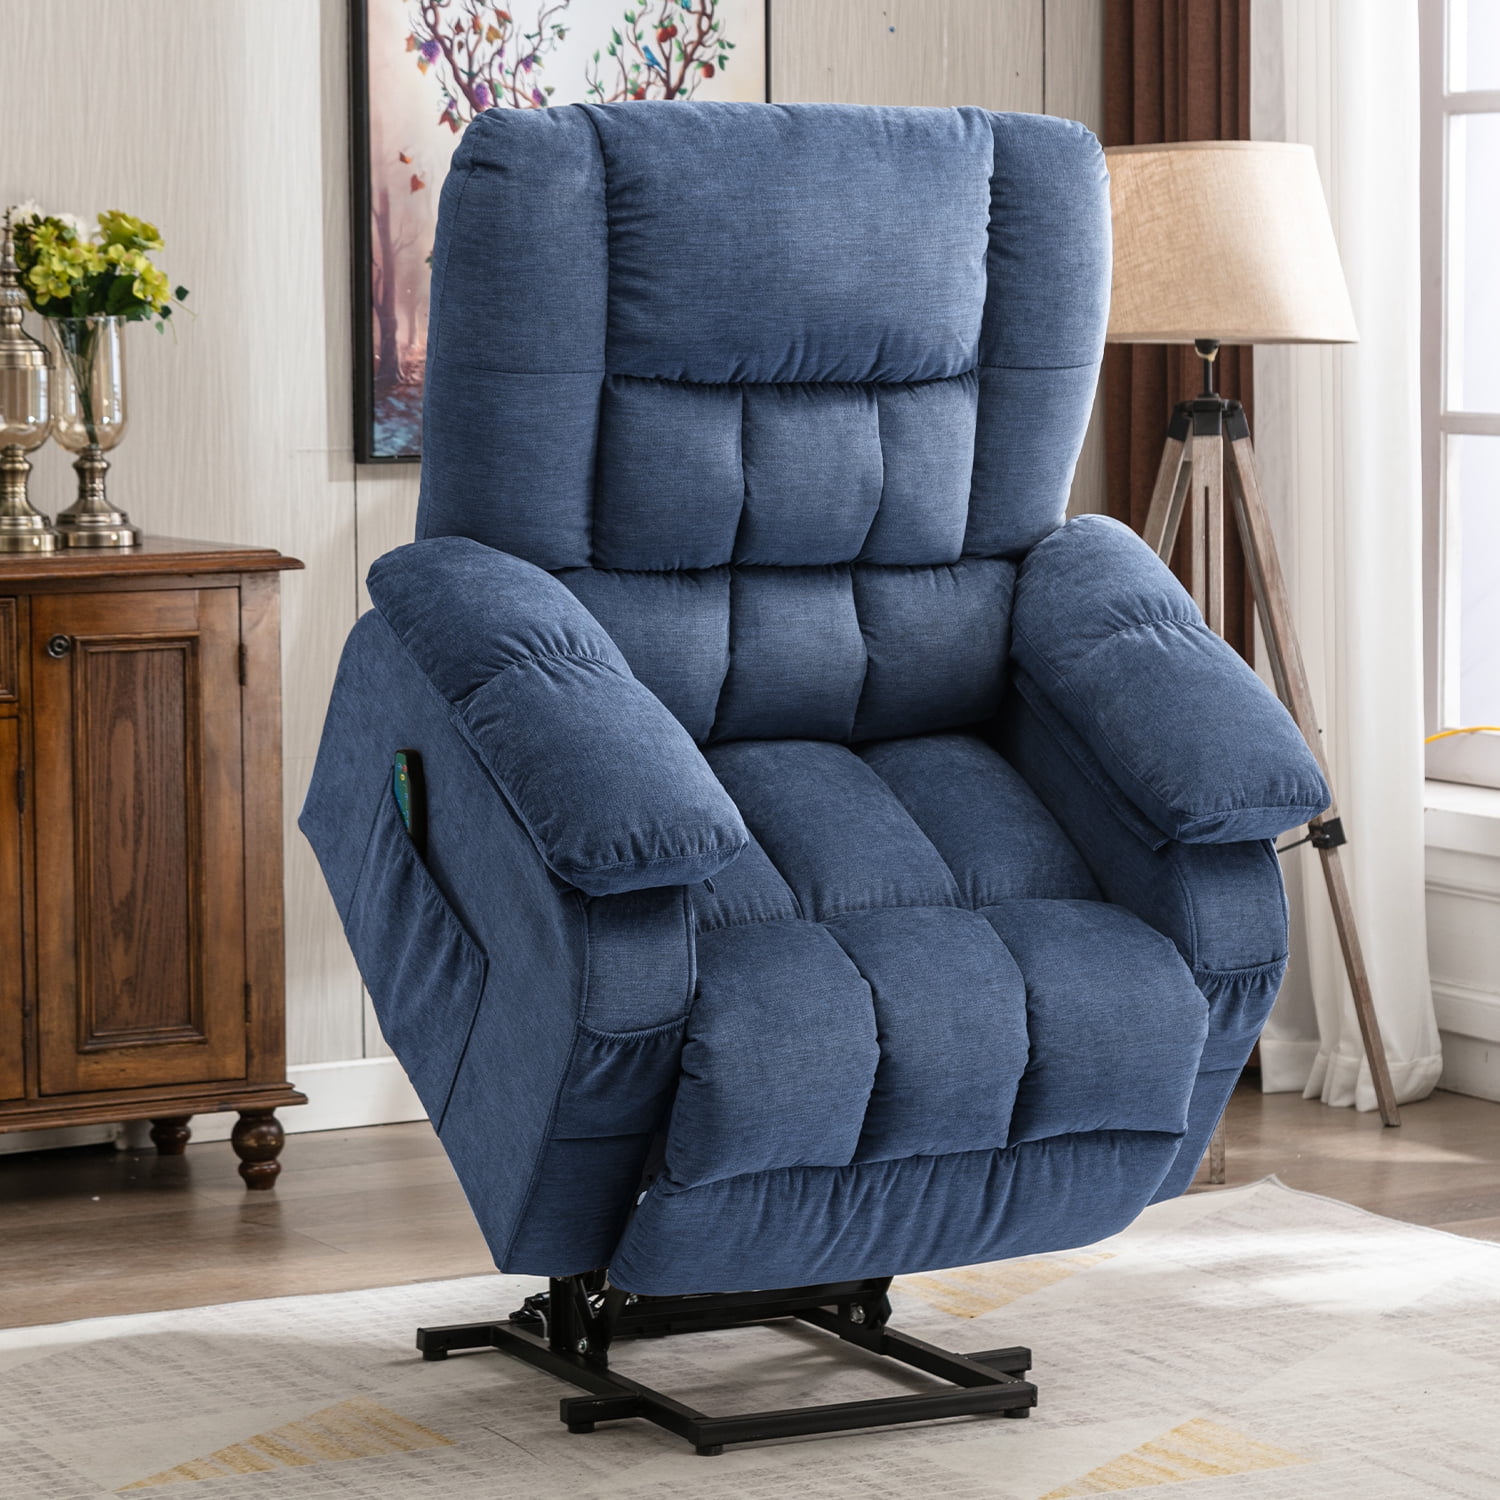 Comfort: Finding the Perfect Cheap Recliner for Your Home缩略图